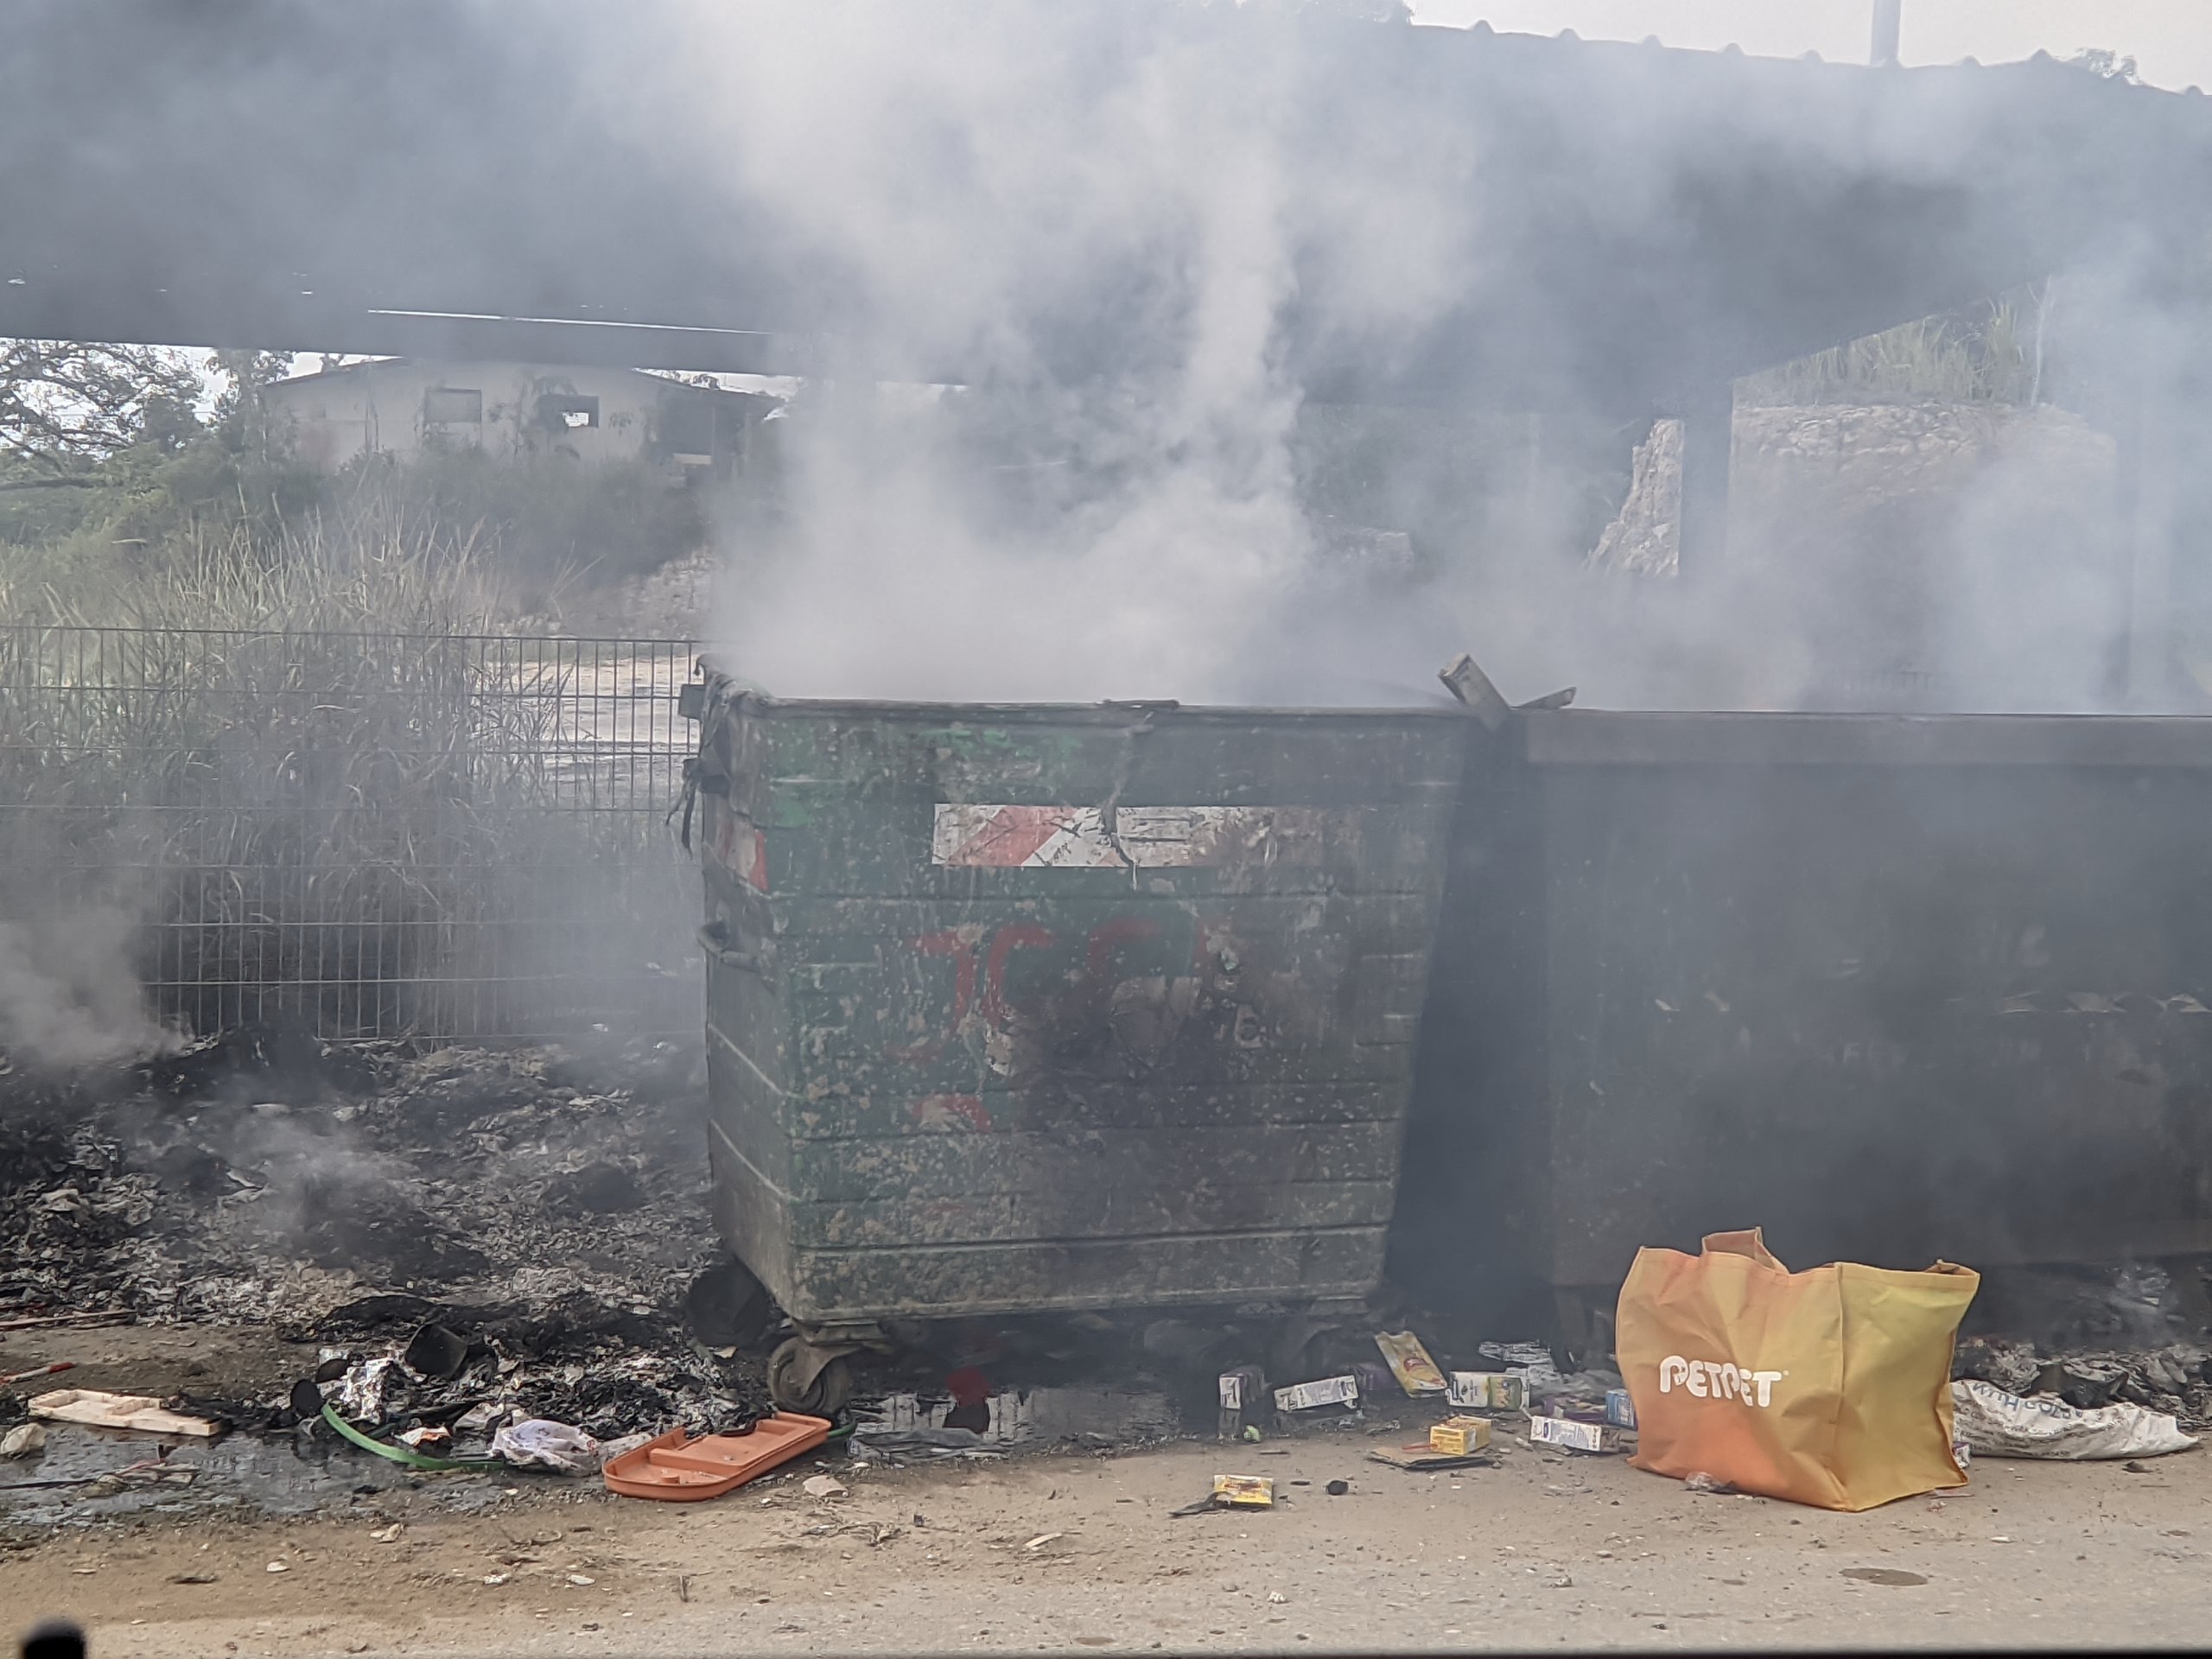 The bins at a rubbish collection point that were set on fire at a residential area in Jalan Bukit Penyau, Salim on Sunday.